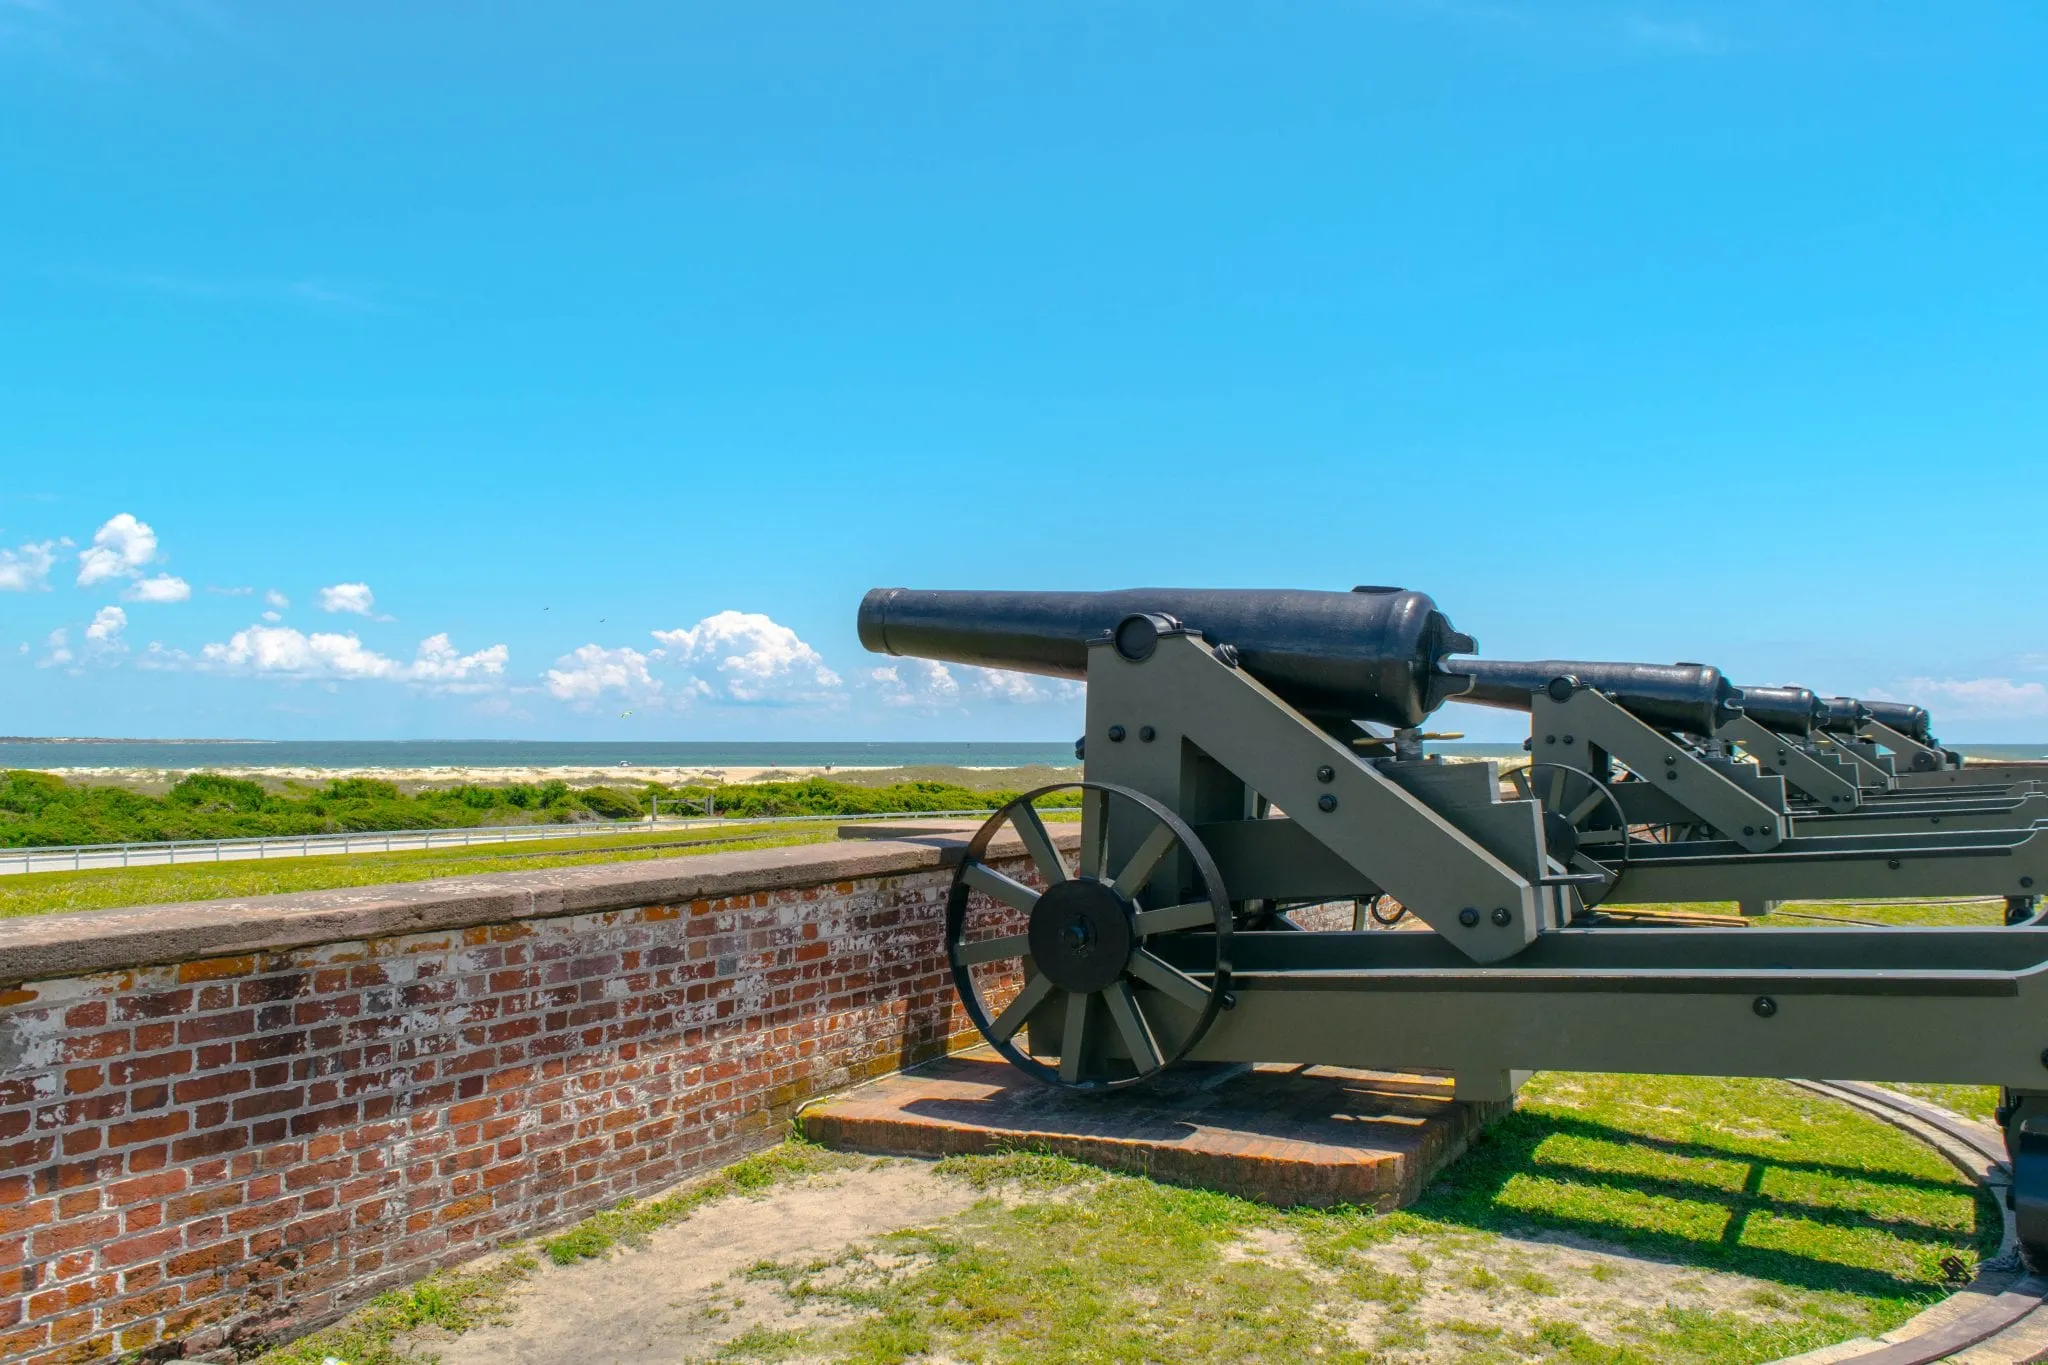 Cannons overlooking Fort Macon NC with the beach visible in the distance